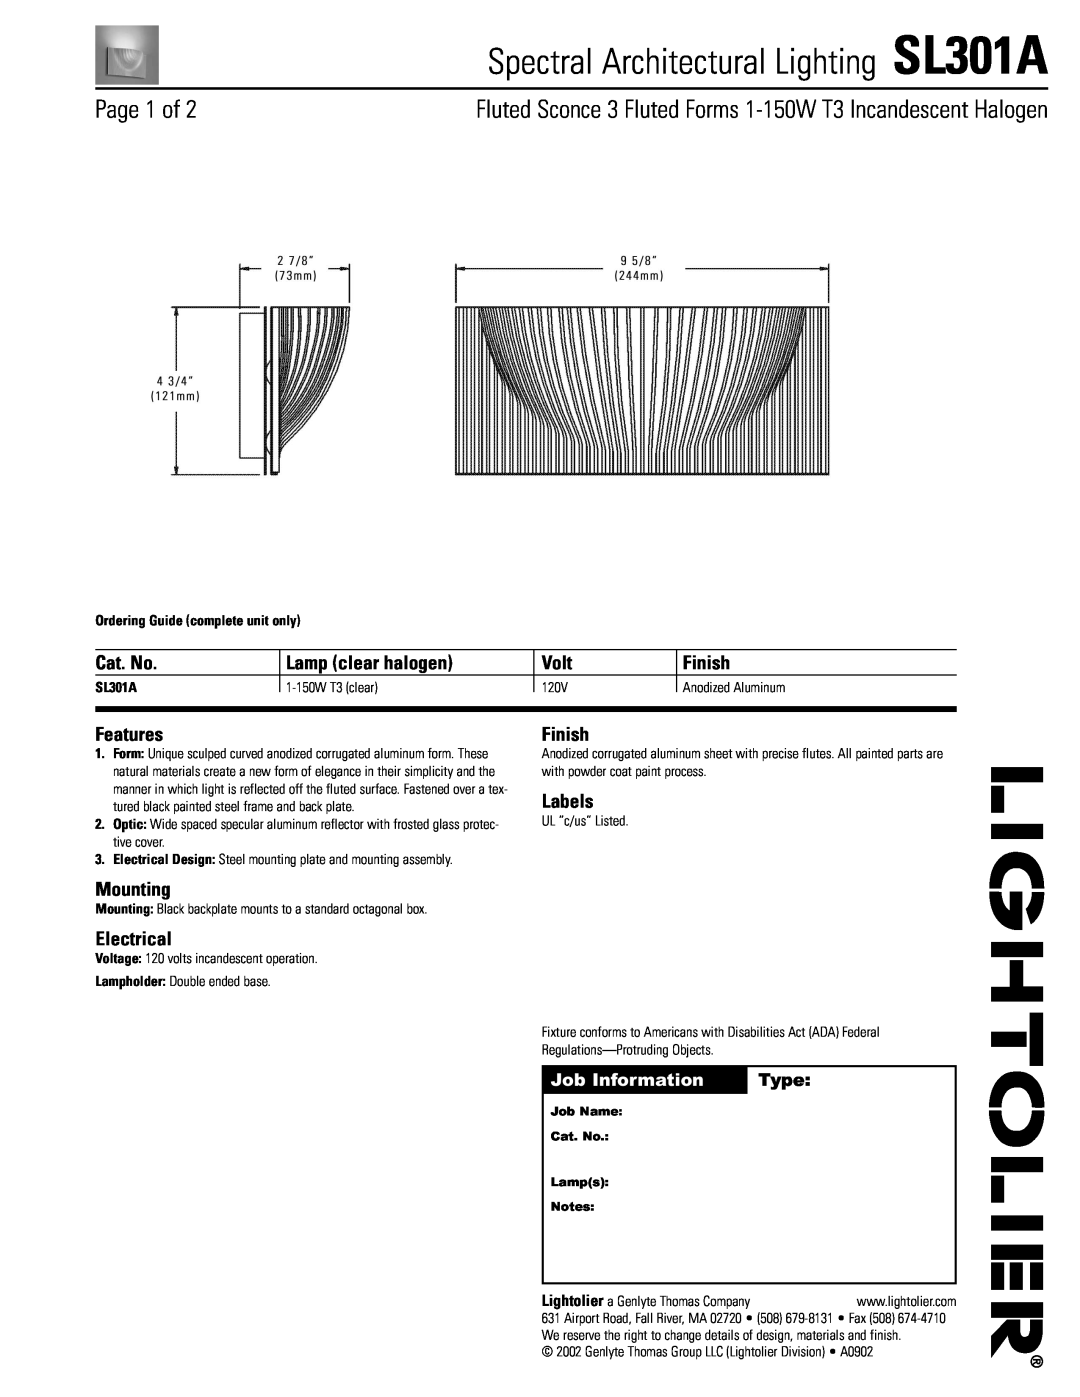 Lightolier manual Spectral Architectural Lighting SL301A, Page 1 of, Job Information, Type, Cat. No, Lamp clear halogen 